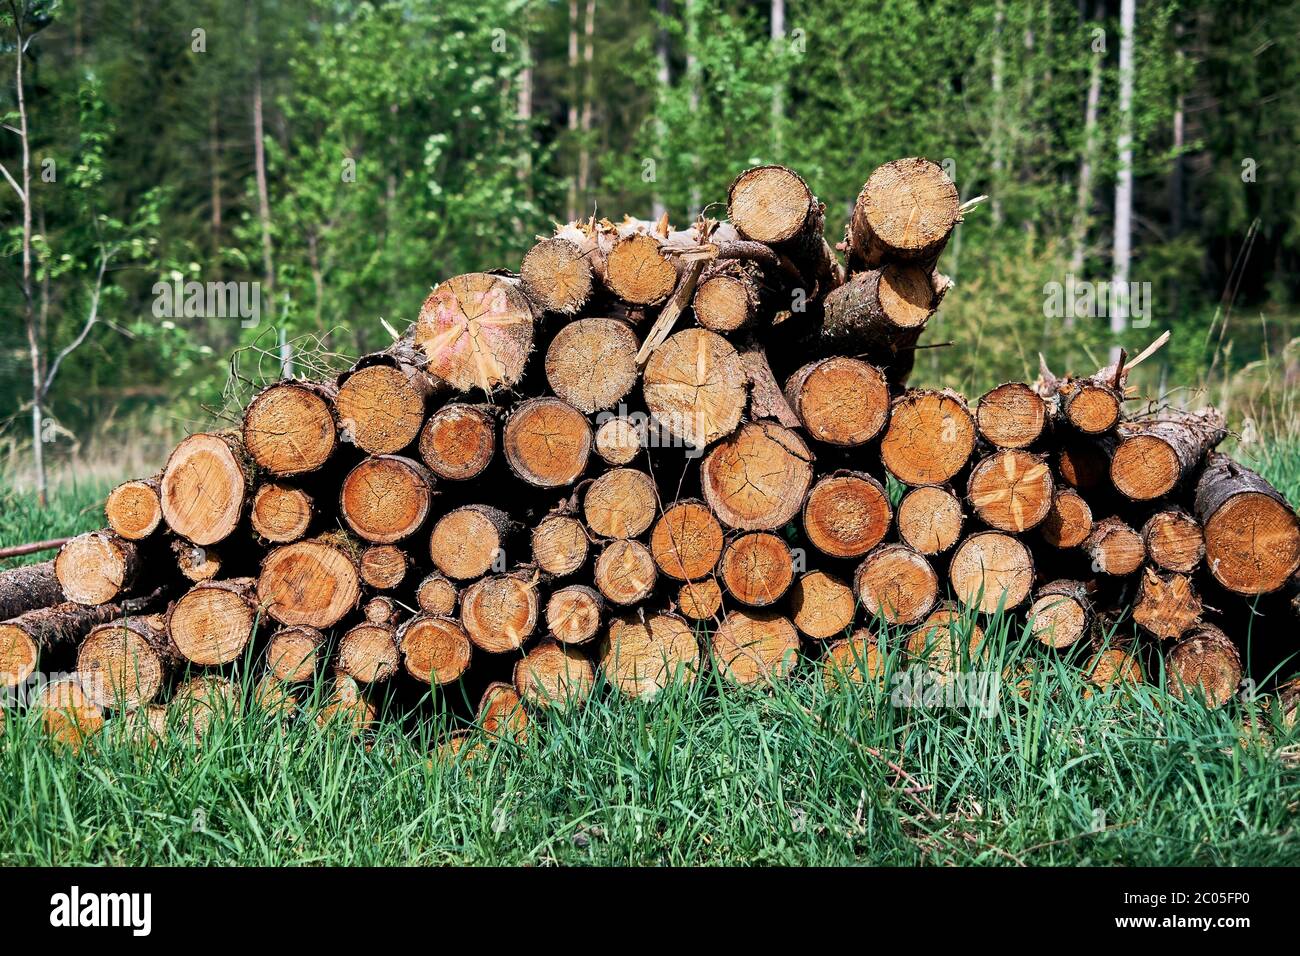 Pile of wood after deforestation. Tree logs lie on the ground in the forest. Dry chopped firewood logs stacked up on top of each other in Bavaria. Stock Photo